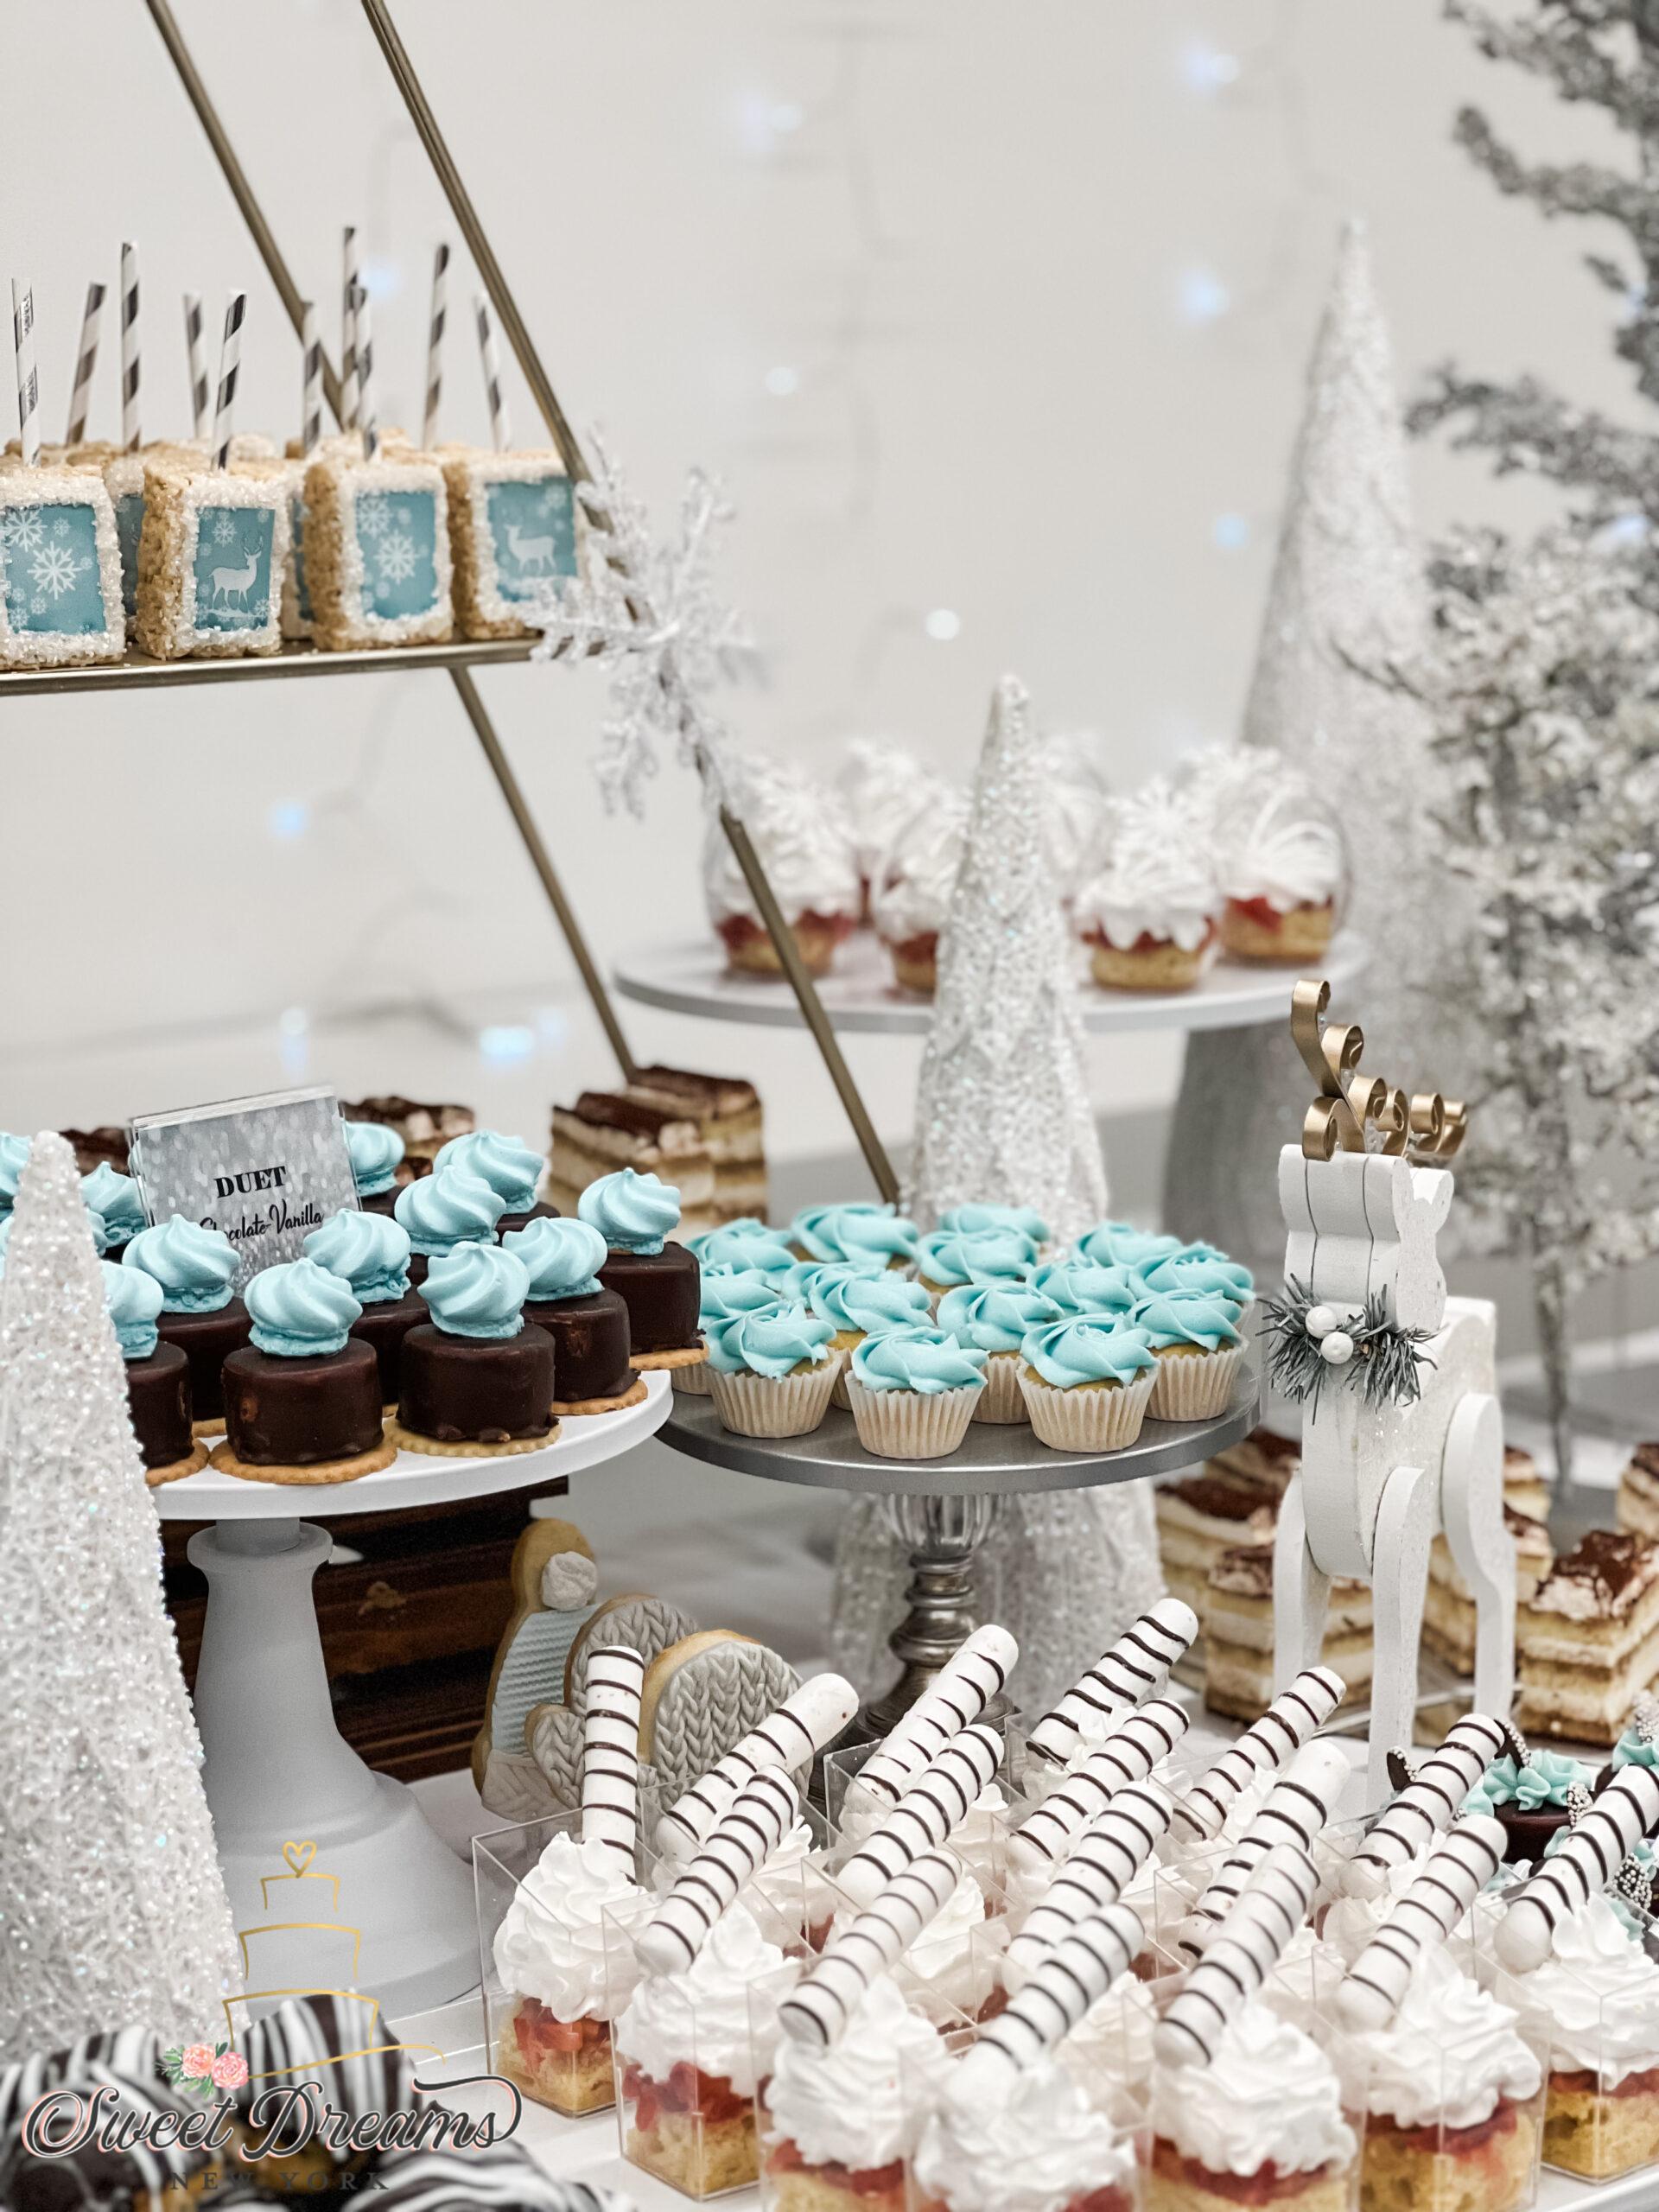 NYC Corporate custom cakes dessert tables Merril Lynch Winter Wonderland Christmas Party sweet table and Custom Cakes